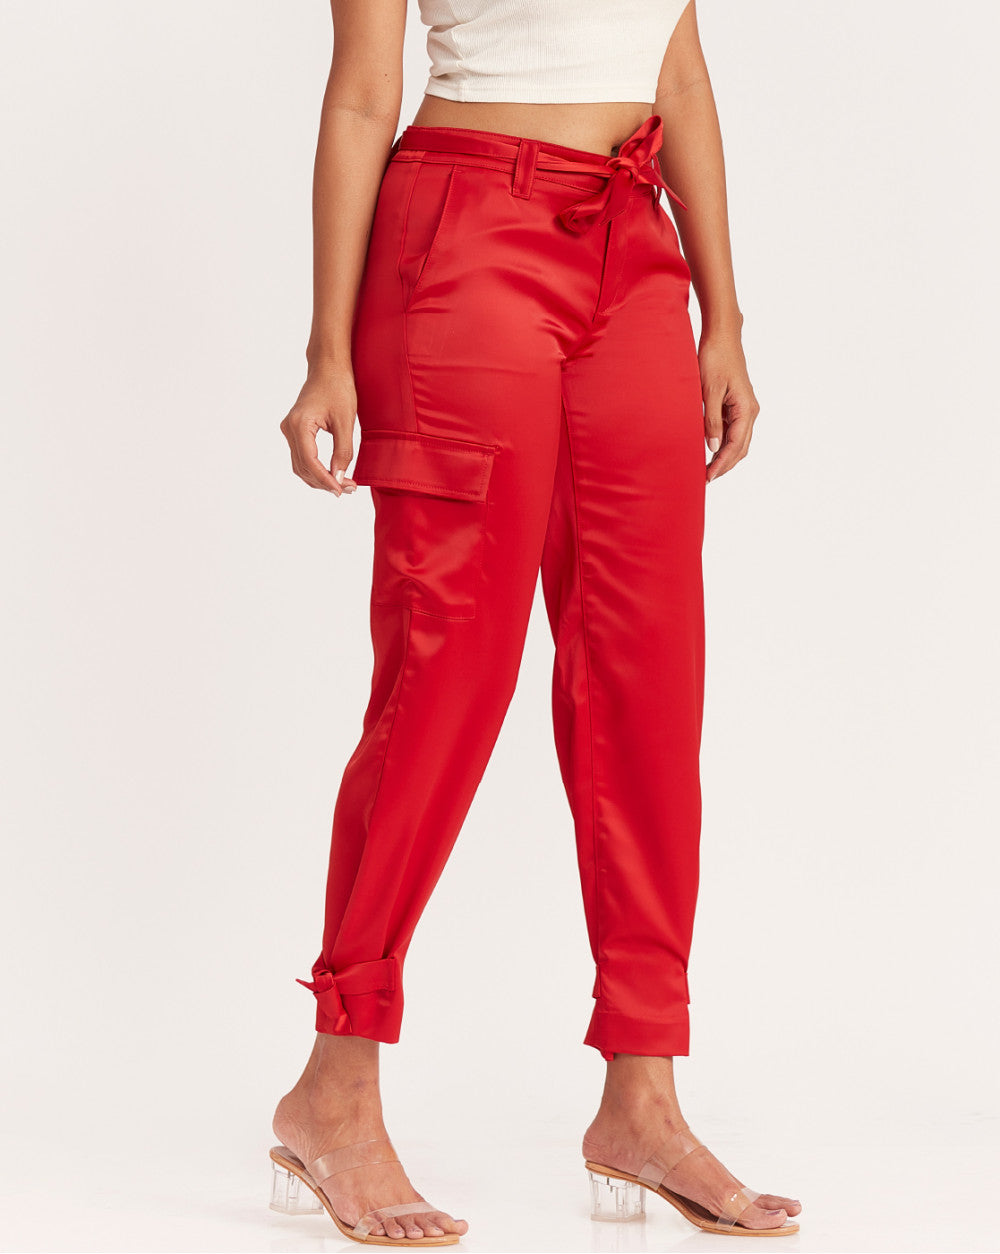 Straight Fit Satin Cargos - Red